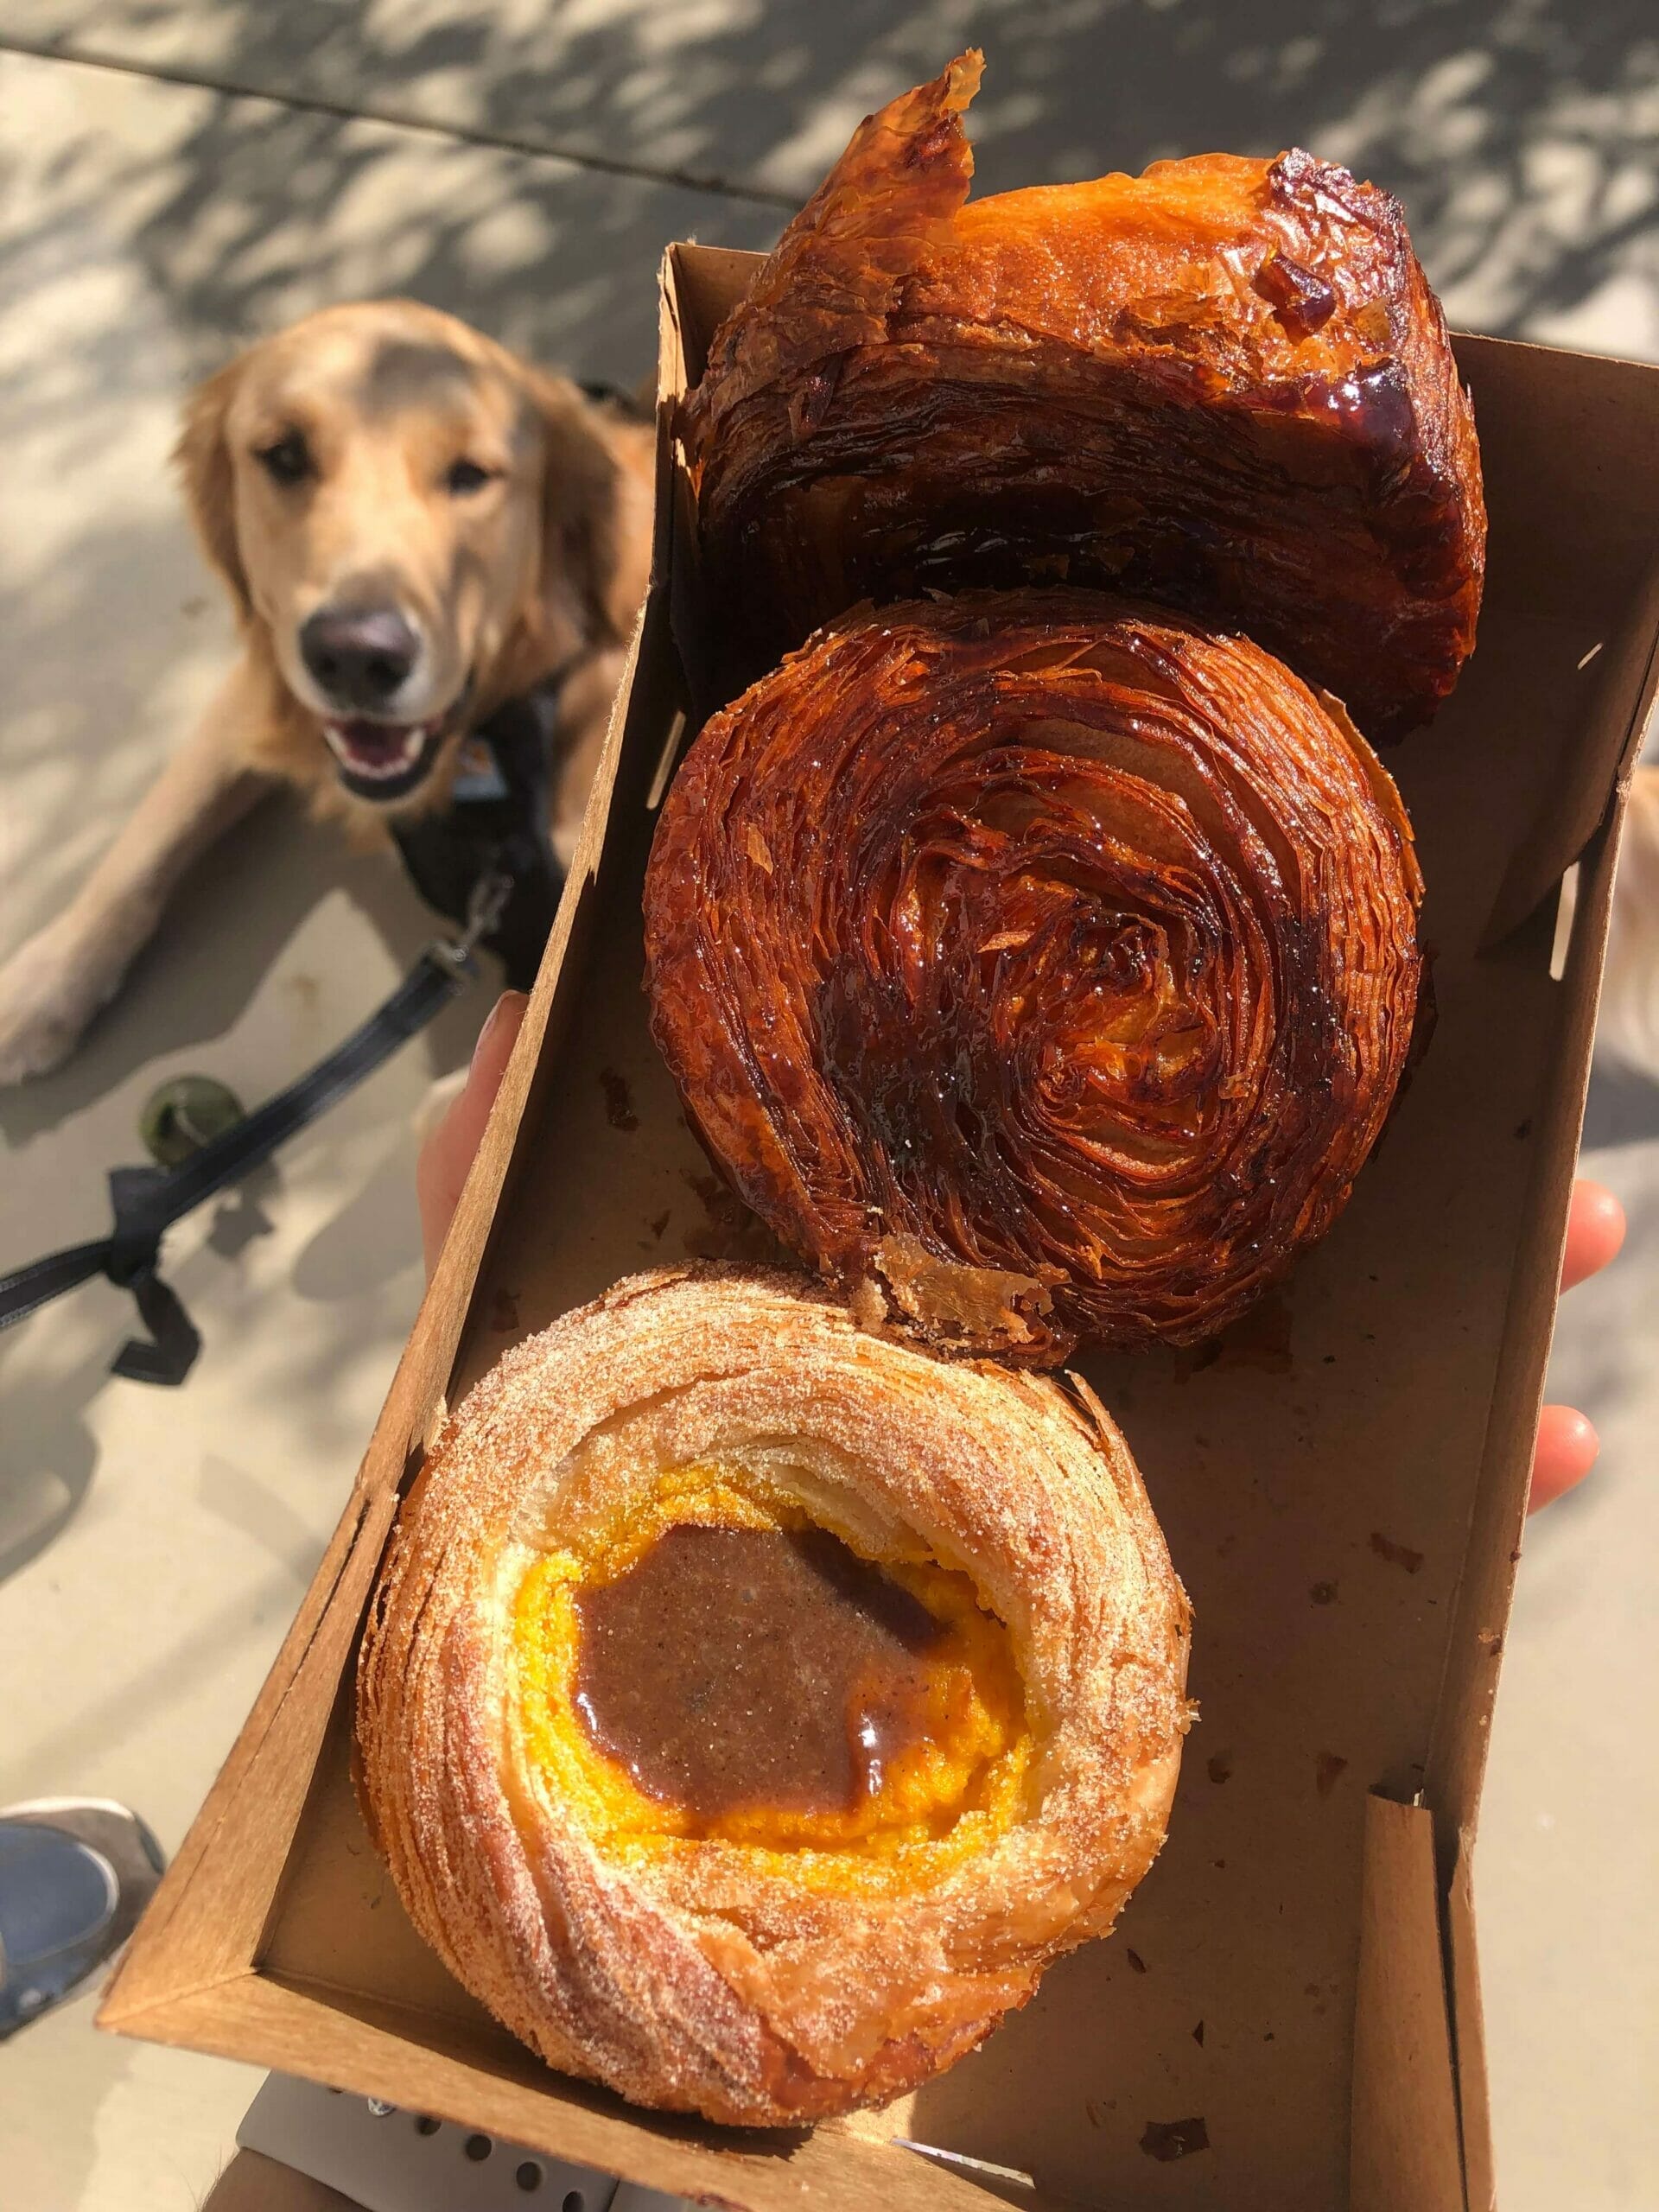 a tray of pastries from Wayfarer in San Diego